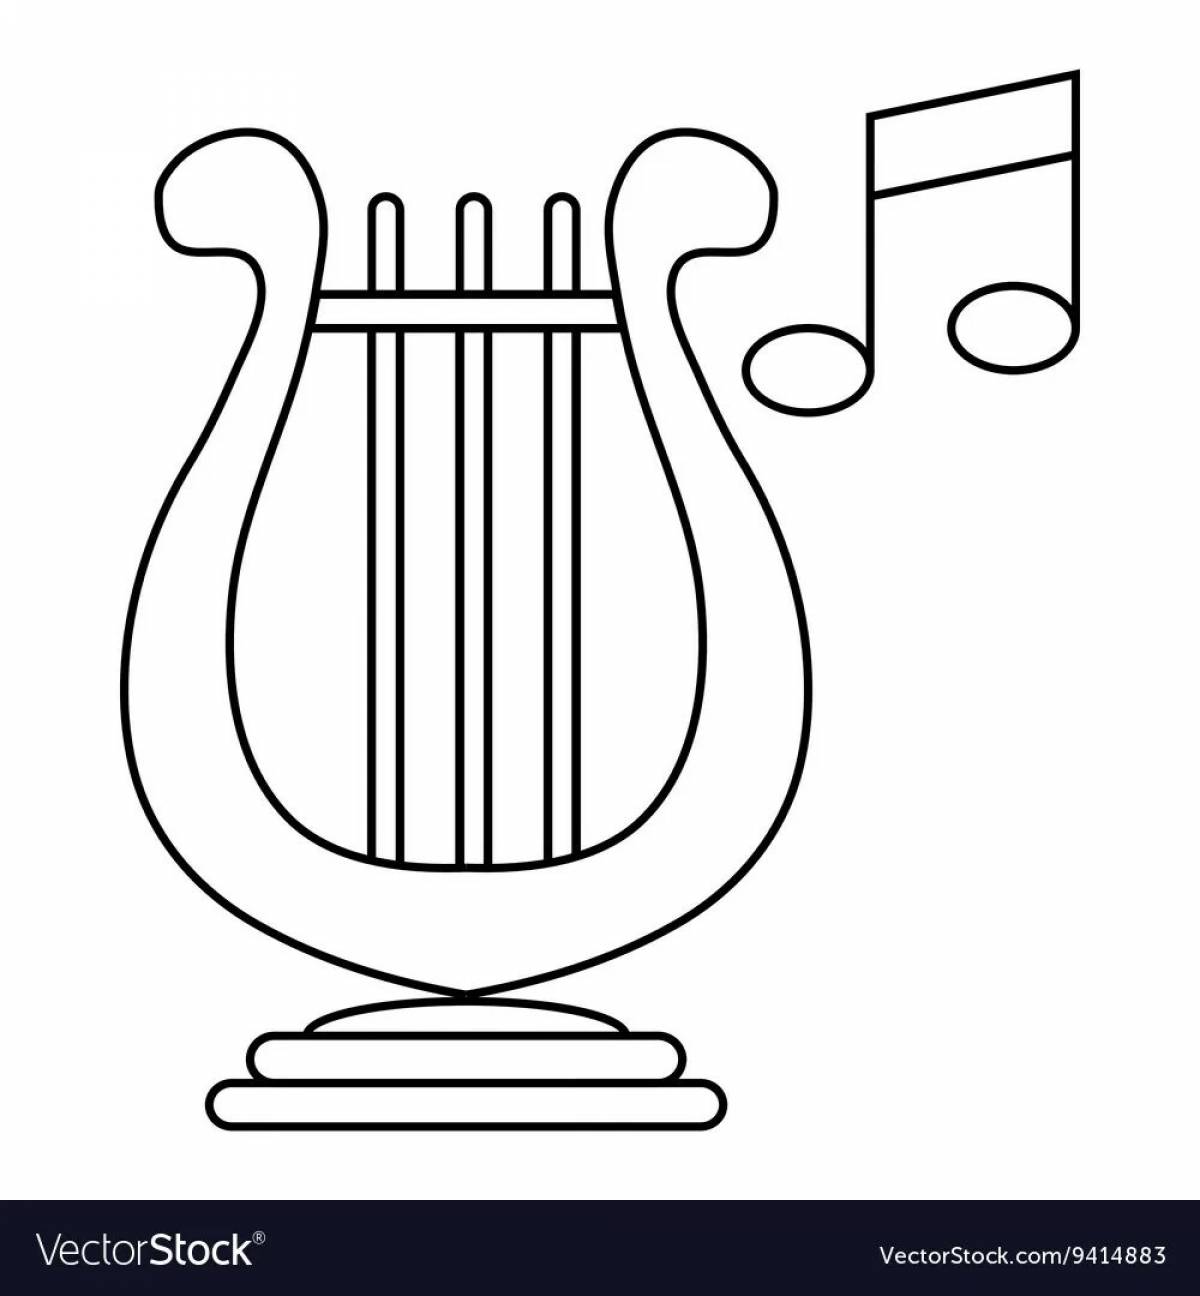 Coloring page graceful lyre